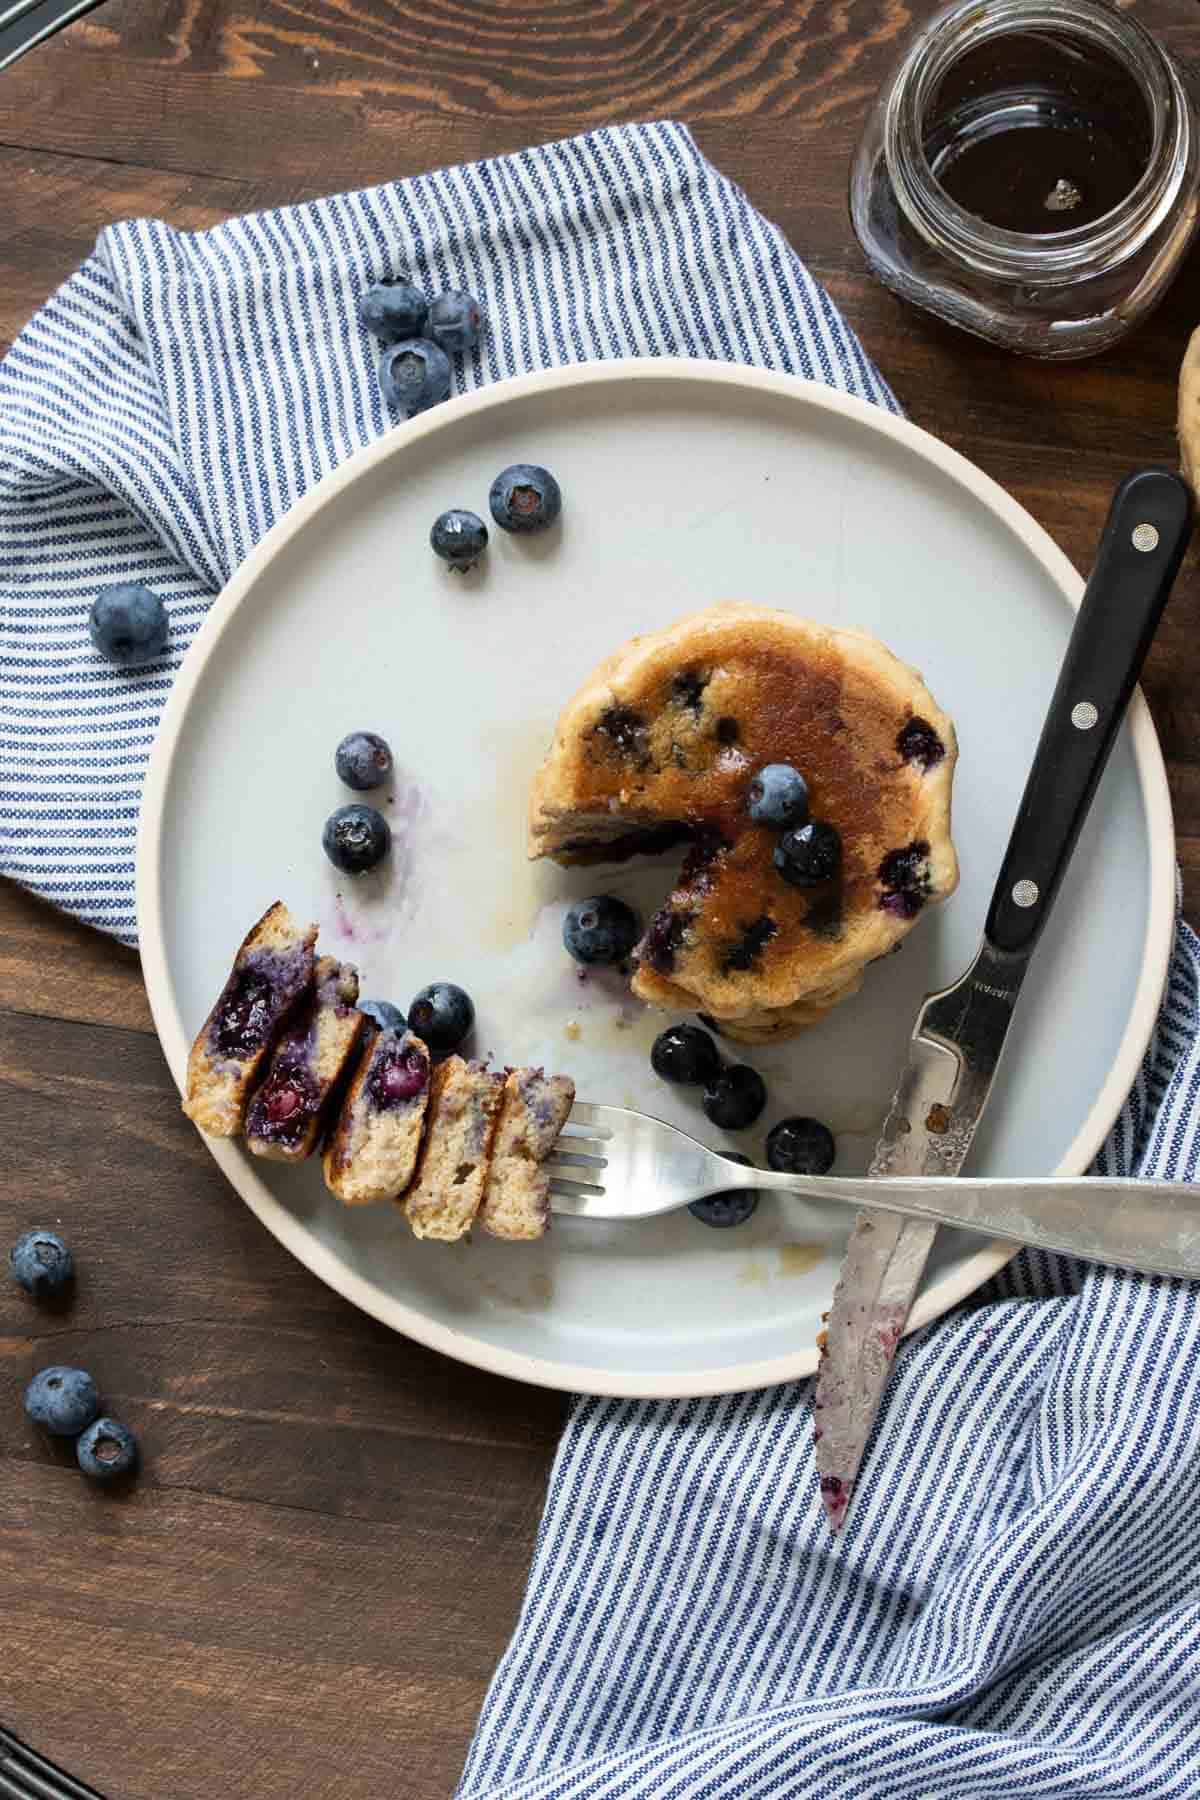 Top view of blueberry pancakes with a cut out bite next to it